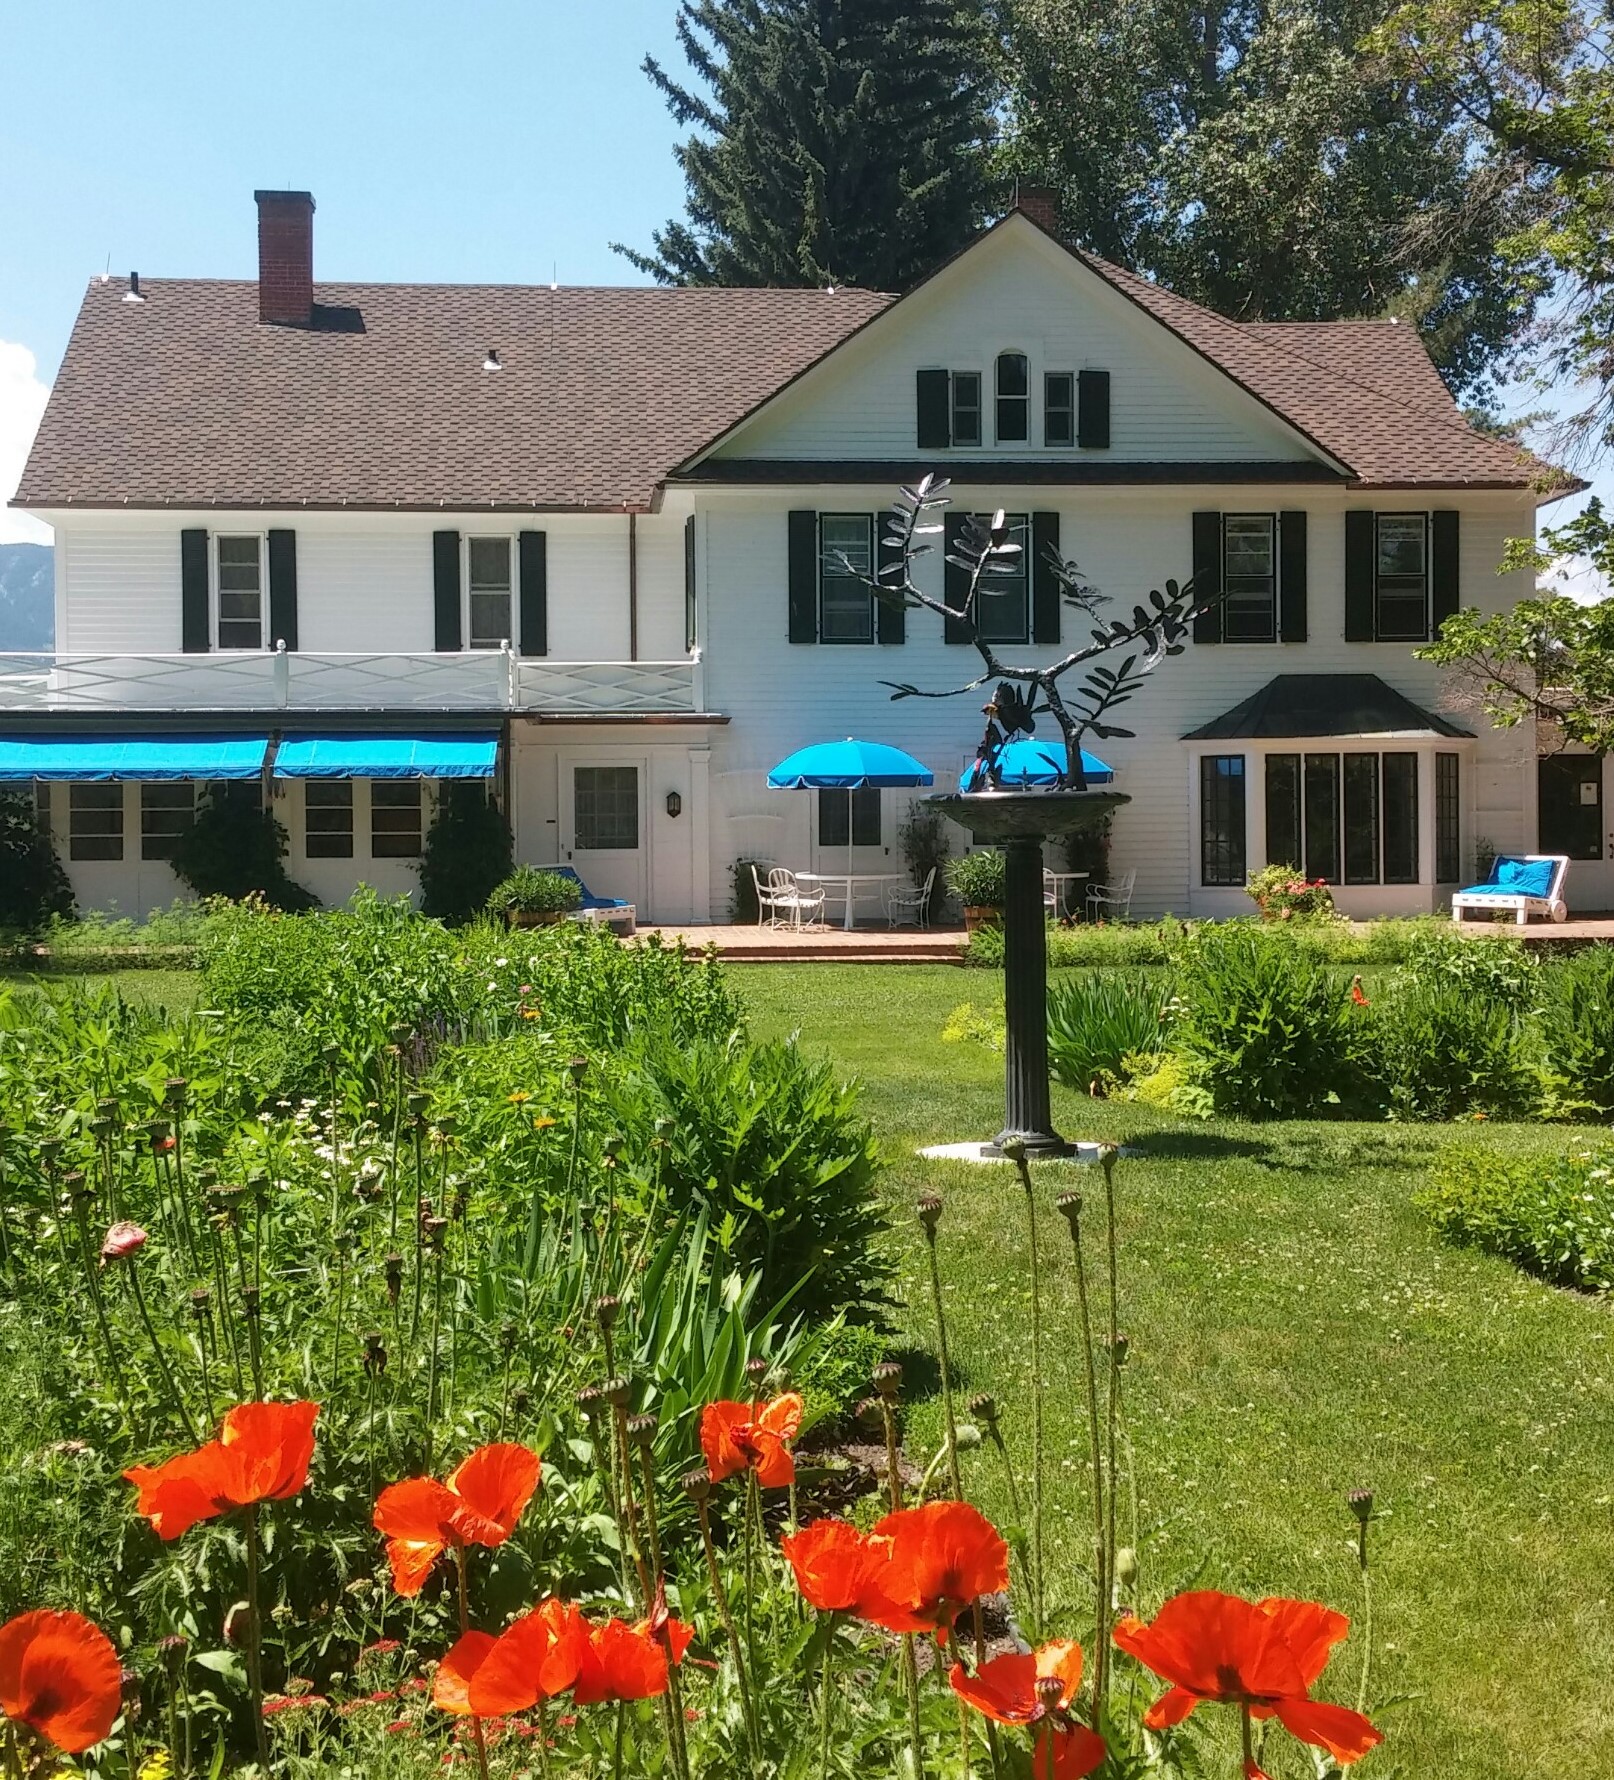 Main House with poppies in June